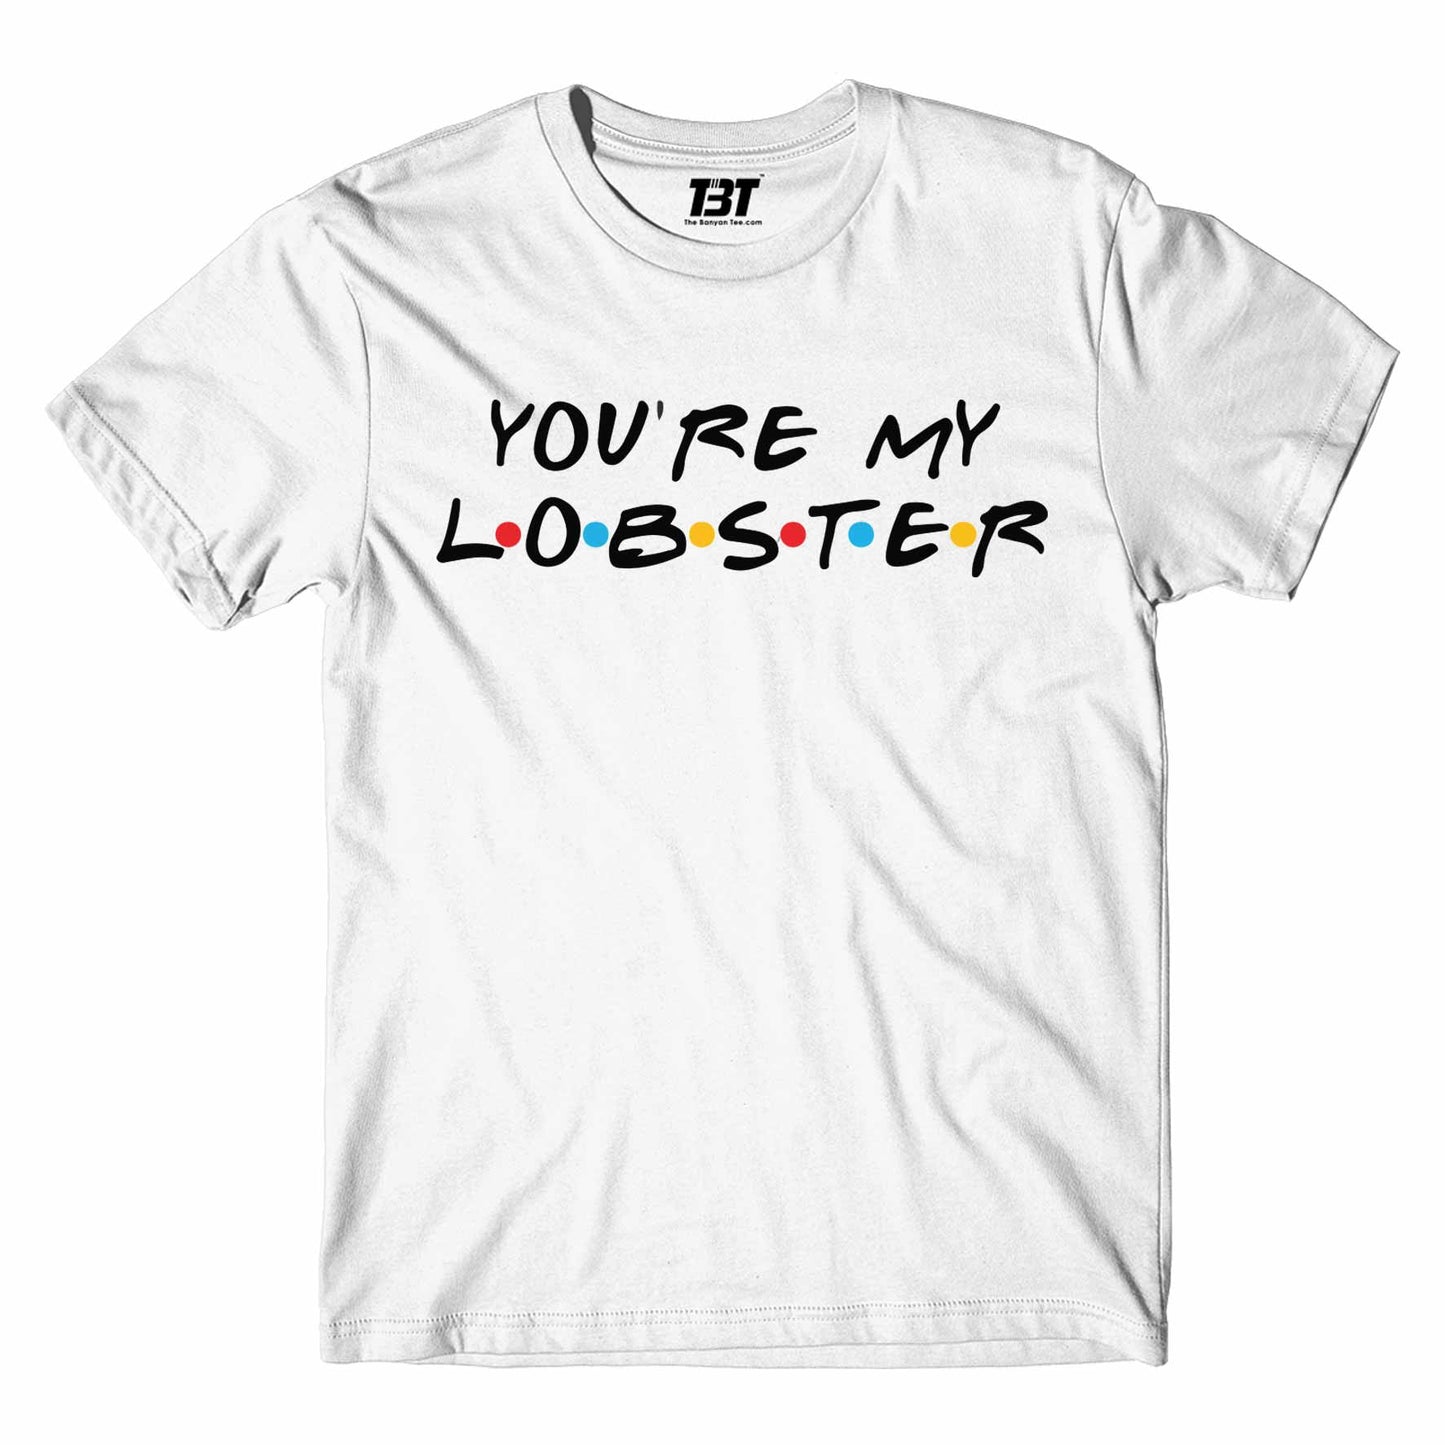 Friends T-shirt - You're My Lobster by The Banyan Tee TBT